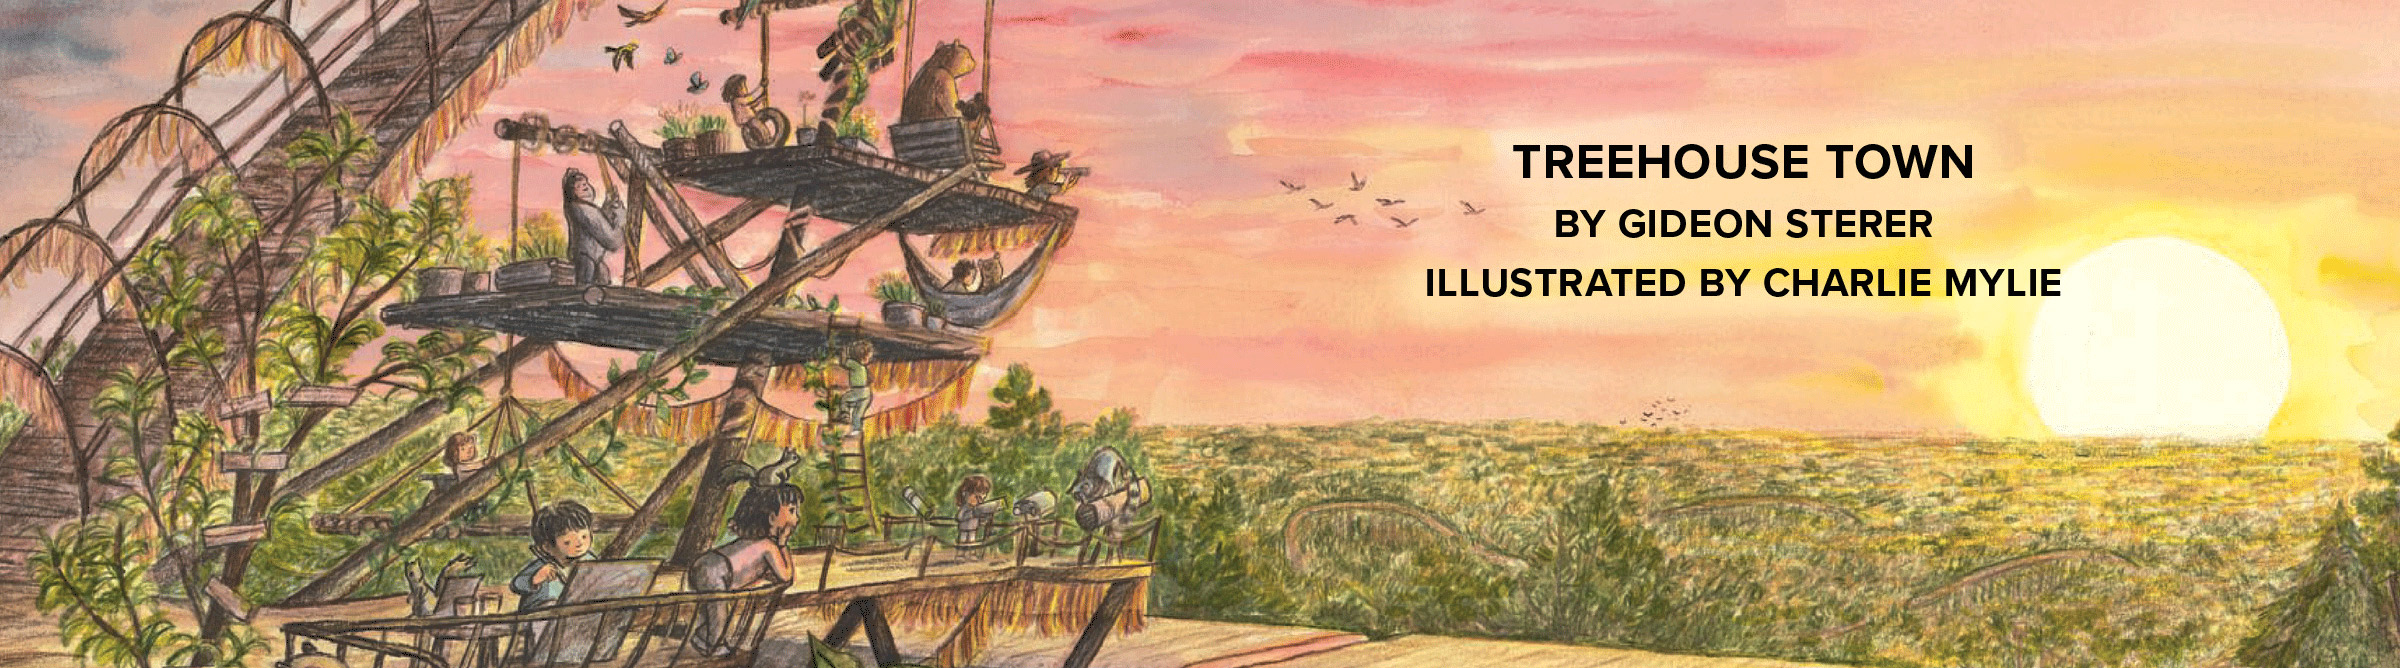 Graphic banner featuring 'Treehouse Town' by Gideon Sterer and illustrated by Charlie Mylie